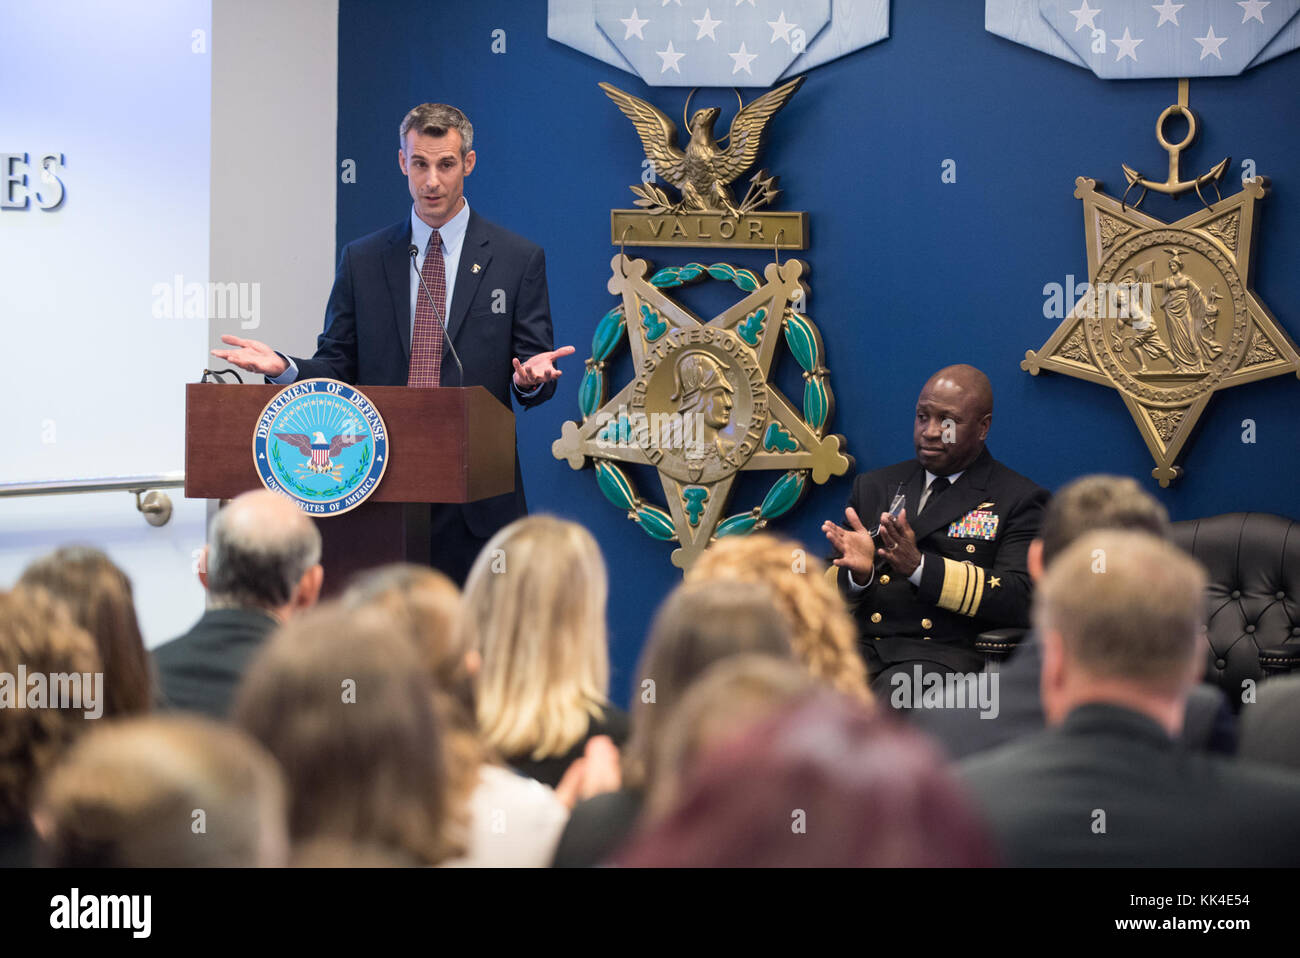 Jeffrey Smith, Vice President of Operations of NewmanÕs Own, Inc.;  speaks during the 2017 NewmanÕs Own Awards at the Hall of Heroes in the Pentagon, Oct. 11, 2017. The annual competition seeks to reward ingenuity for programs that benefit service men, women, and their families. To date, the competition has recognized 174 programs with awards totally $1, 725,000. (DoD Photo by U.S. Army Sgt. James K. McCann) Stock Photo